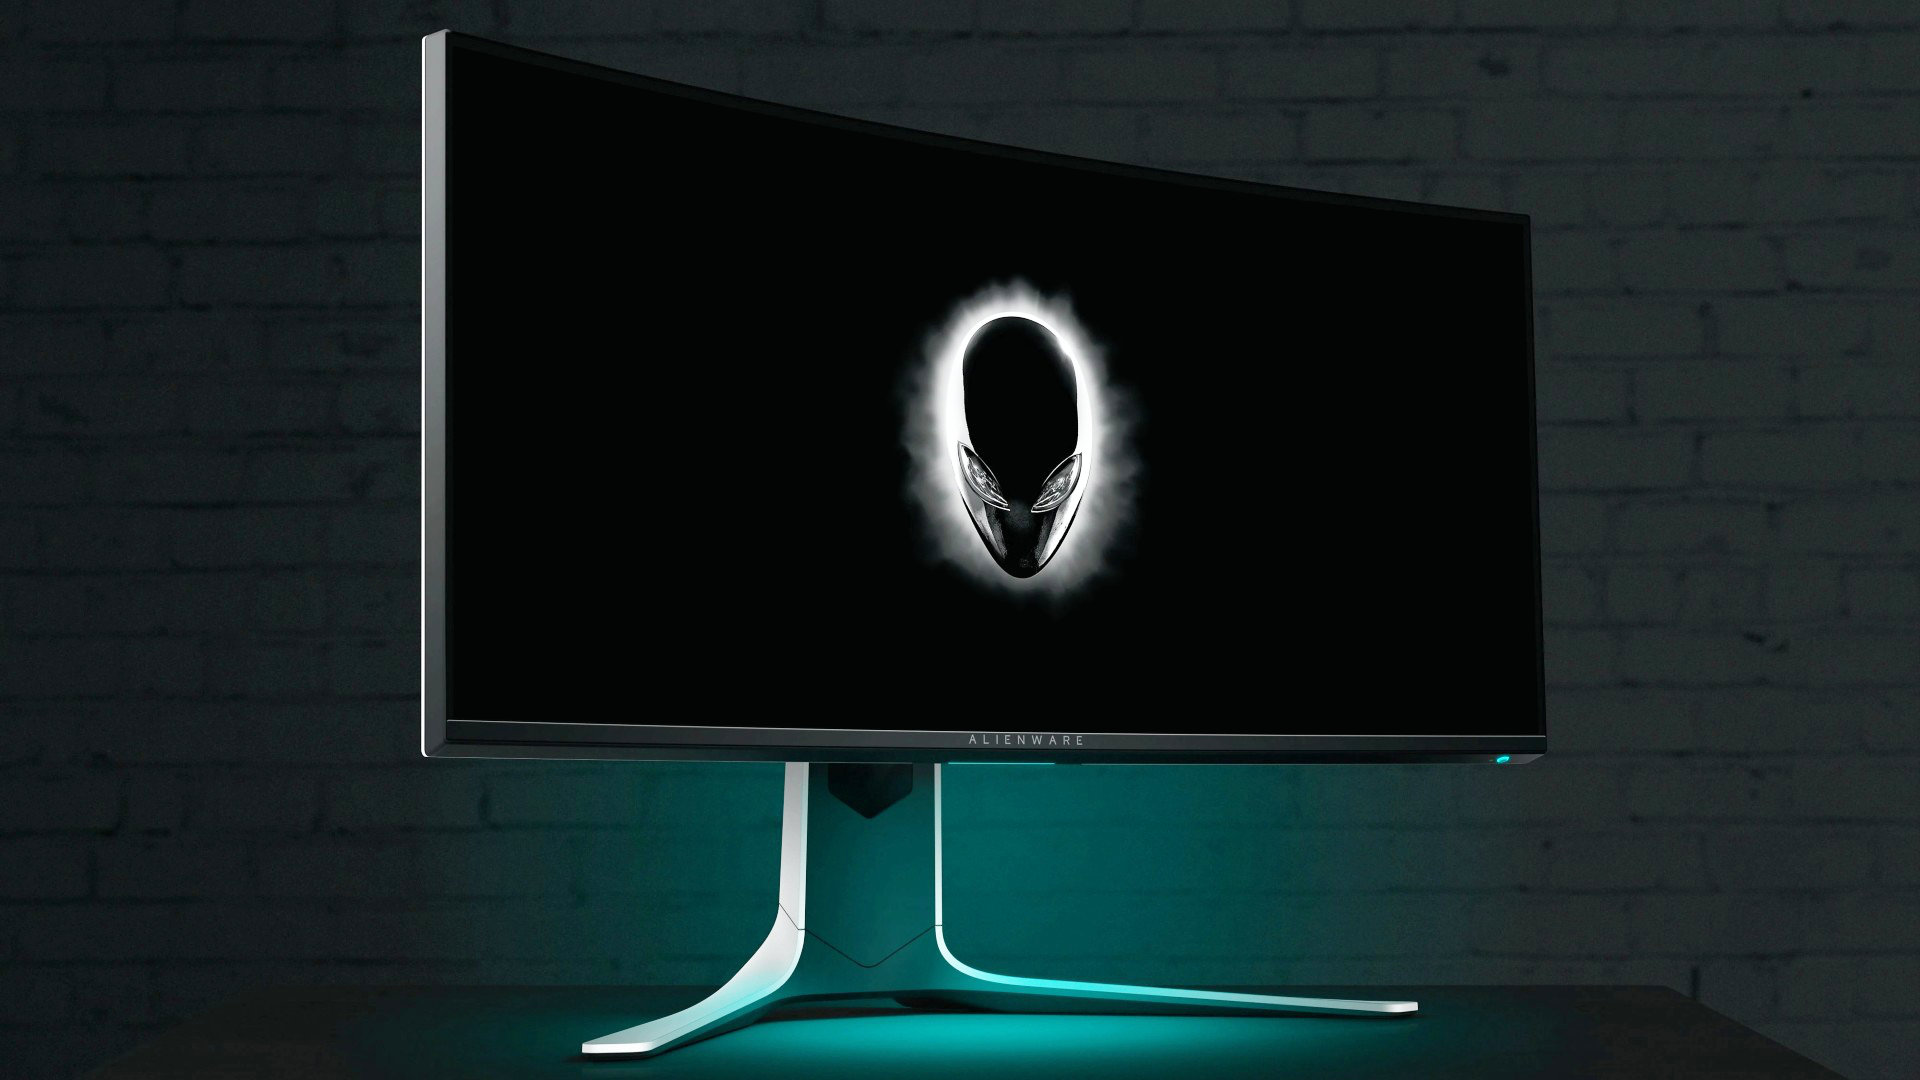 Save up to $600 on Alienware UltraWides, 360Hz gaming monitors, more in  Dell's July 4th sale